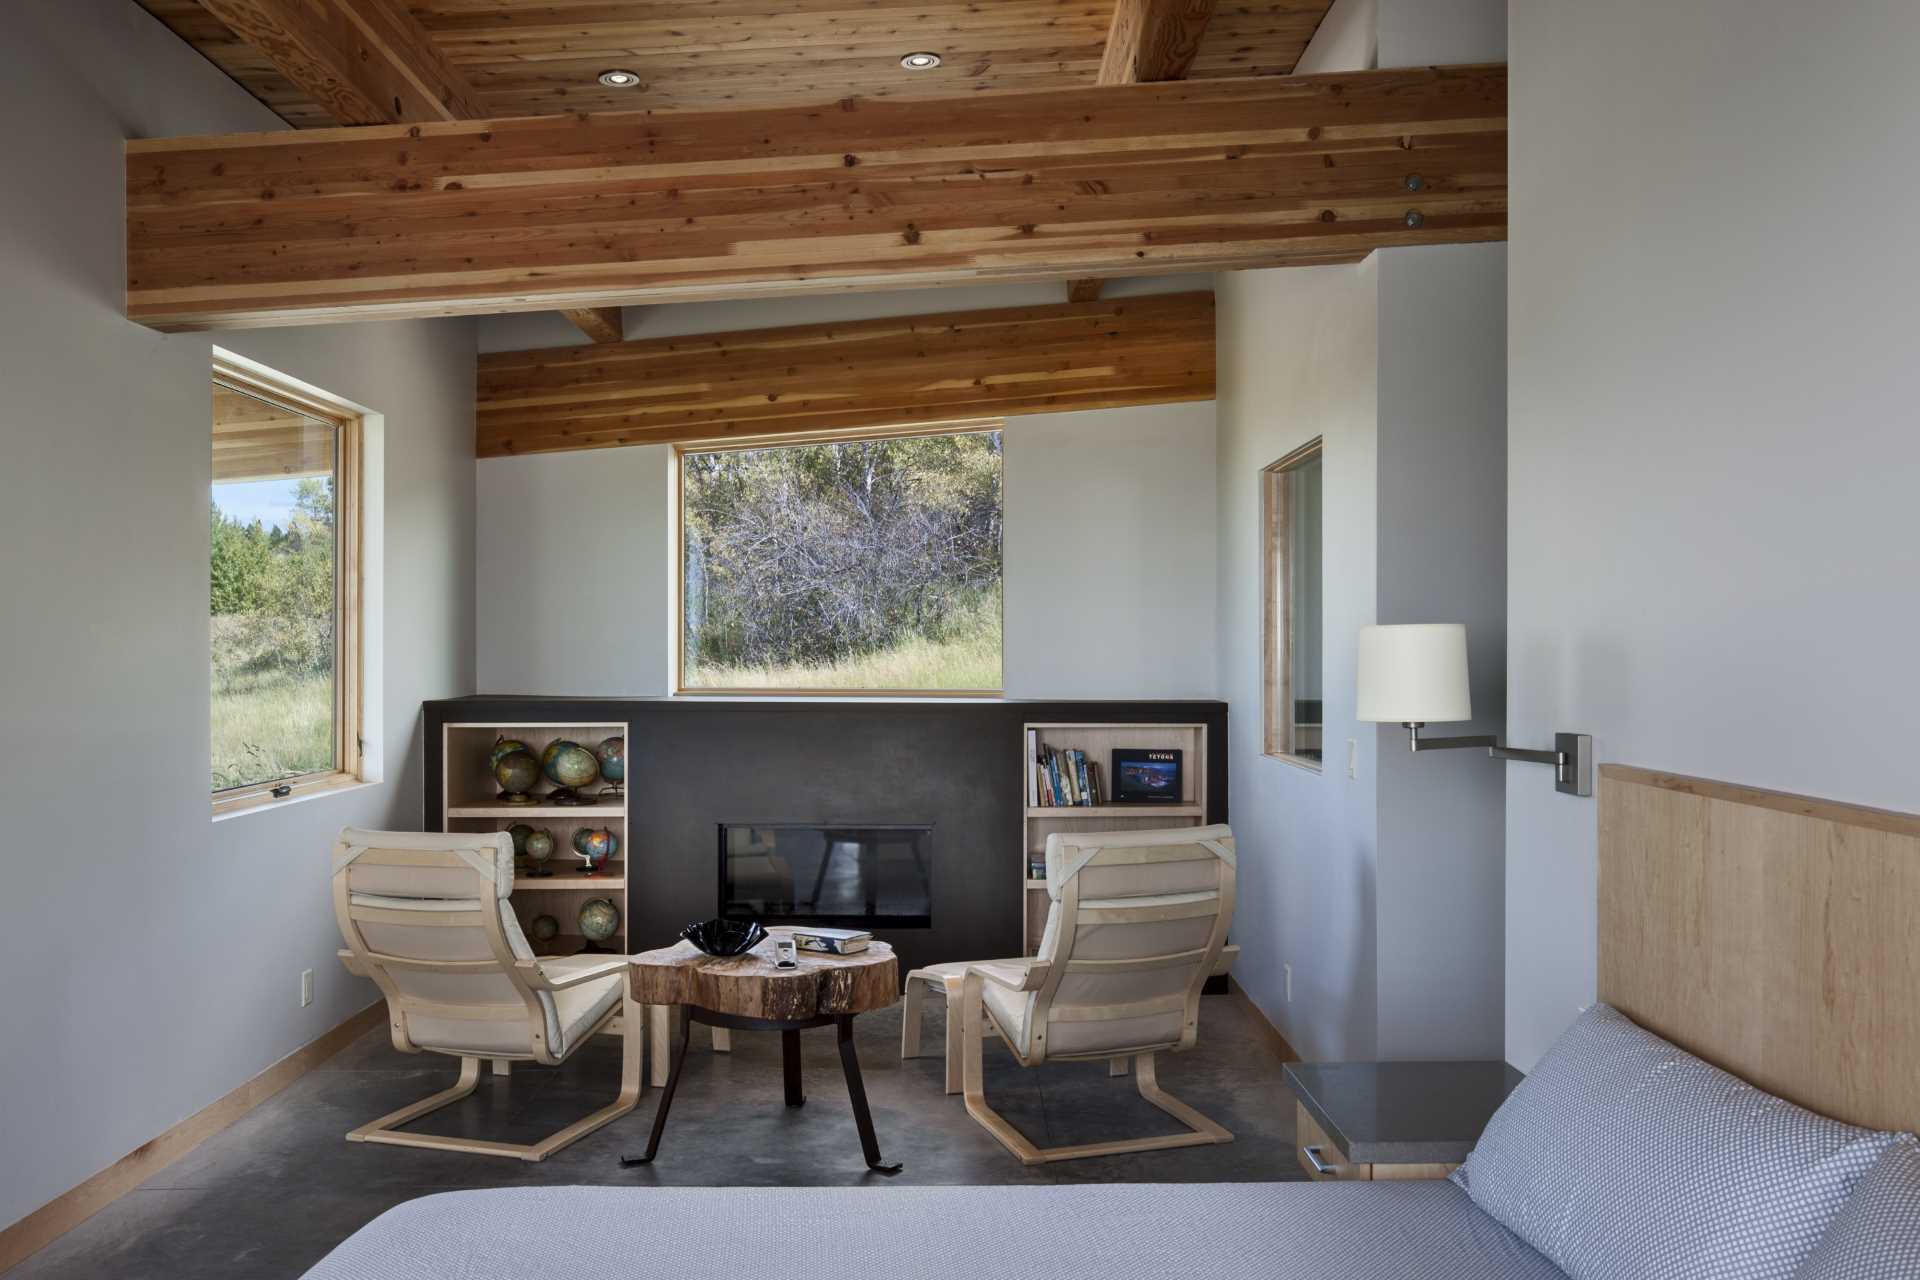 In this bedroom, there's a sitting area with a fireplace, while the structural wood beams can easily be seen.